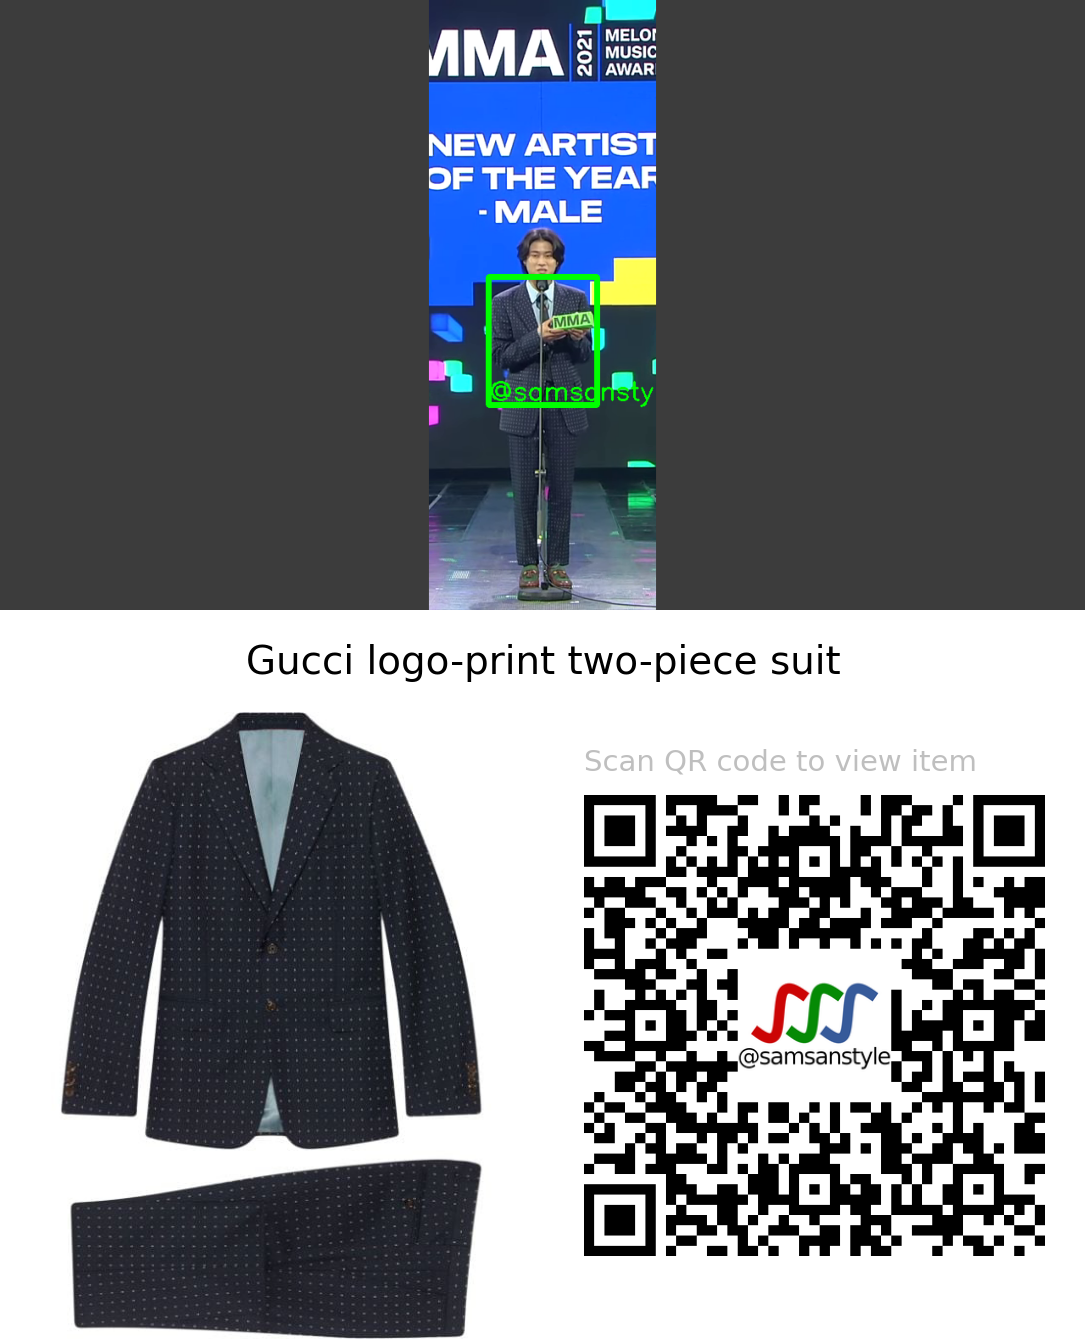 Lee Mujin | MMA 2021 Male New Artist of the Year Remarks | Gucci logo-print two-piece suit